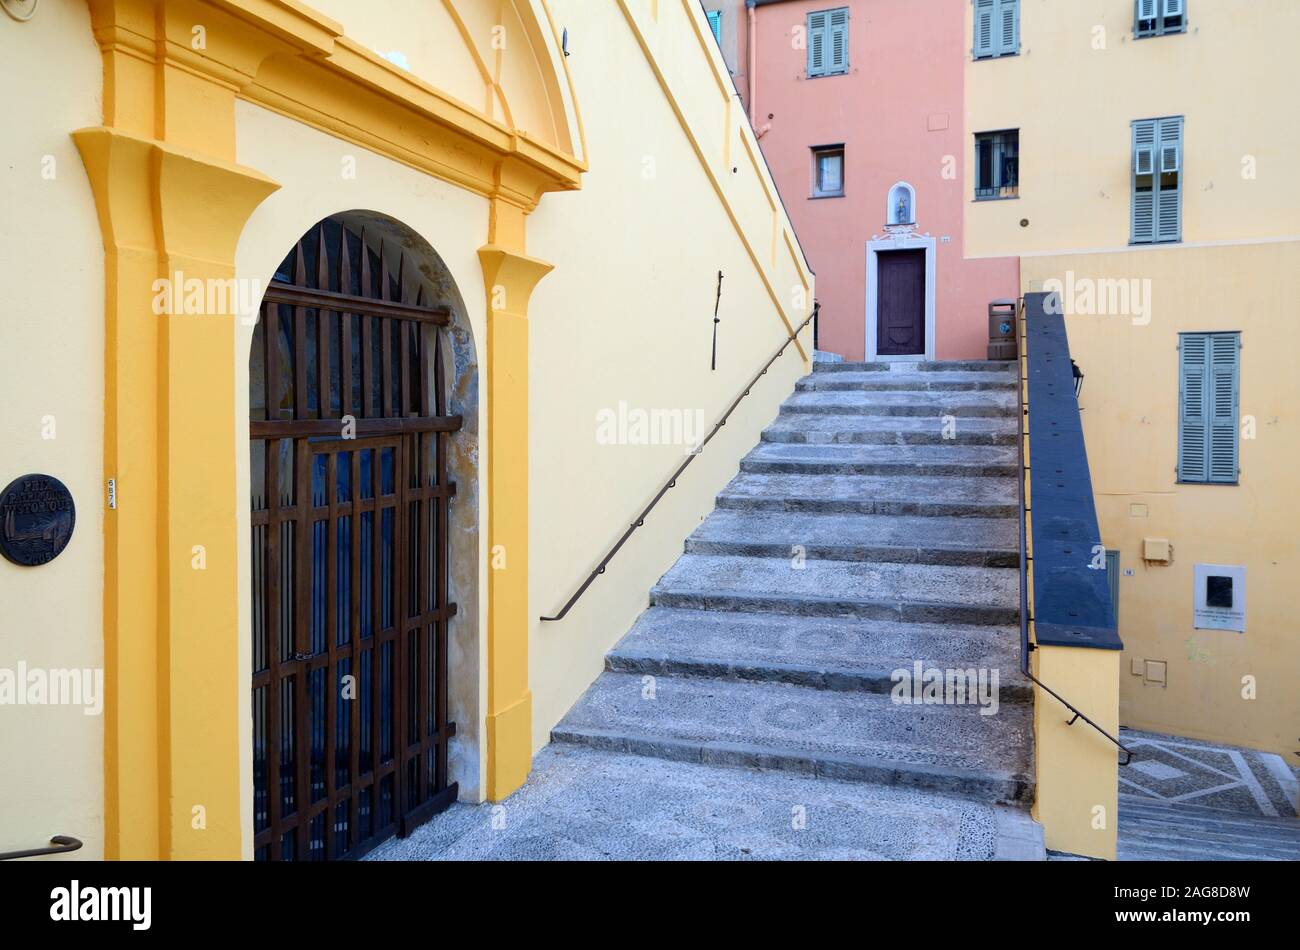 Saint Michel Steps & Colourful Traditional Architecture in the Old Town or Historic District Menton Alpes-Martimes France Stock Photo